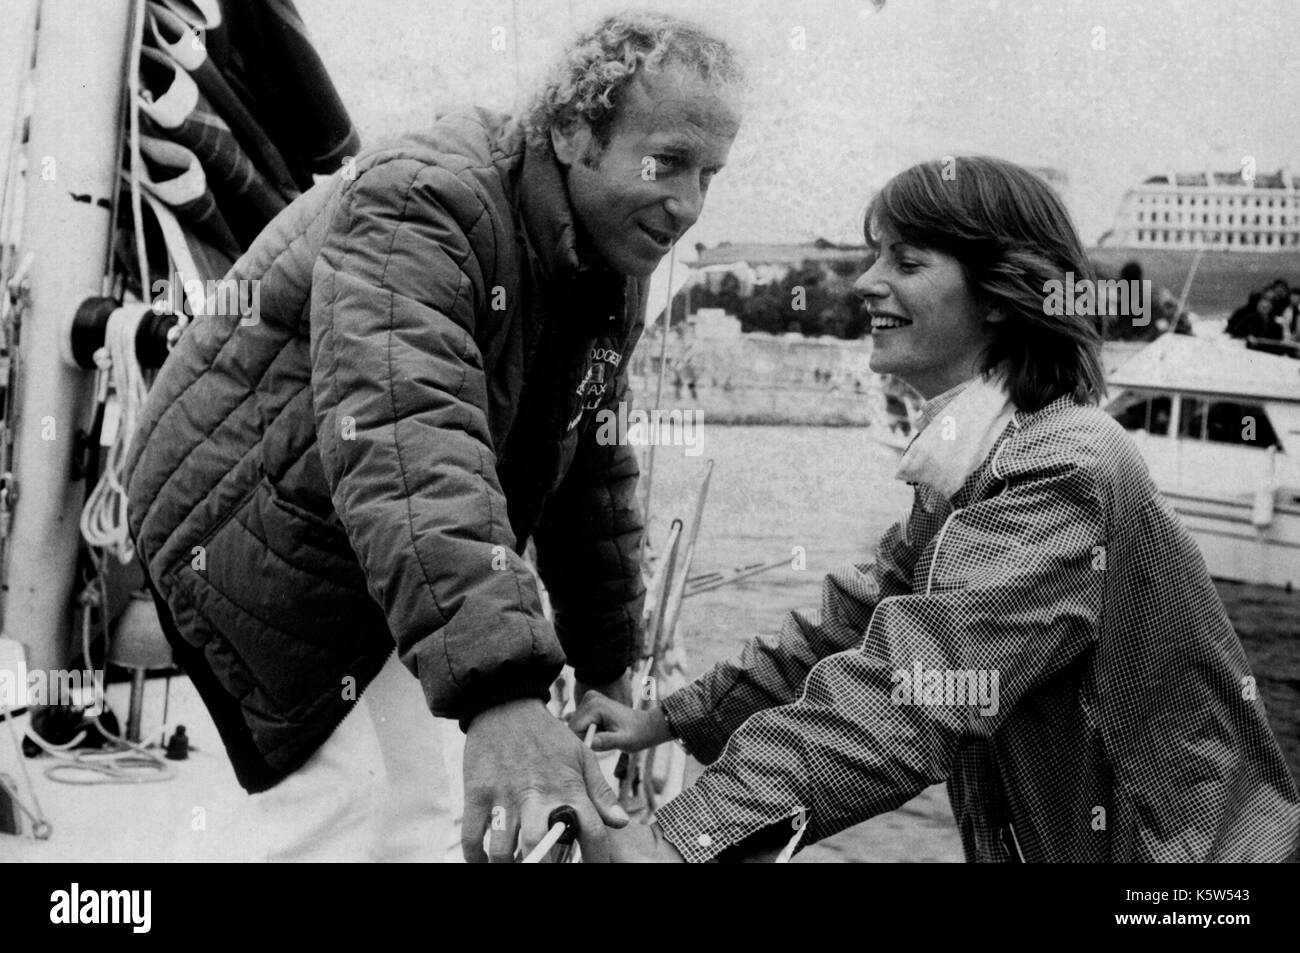 AJAXNETPHOTO. 28TH JUNE, 1981. PLYMOUTH, ENGLAND. - ROUND THE WORLD SAILOR - PAUL ROGERS (LEFT), SKIPPER OF THE YACHT SPIRIT OF PENTAX WITH GIRLFRIEND SARA DUROSE BEFORE DEPARTING ON HIS RECORD ATTEMPT.  PHOTO:JONATHAN EASTLAND/AJAX REF:ROGERS 812806 Stock Photo